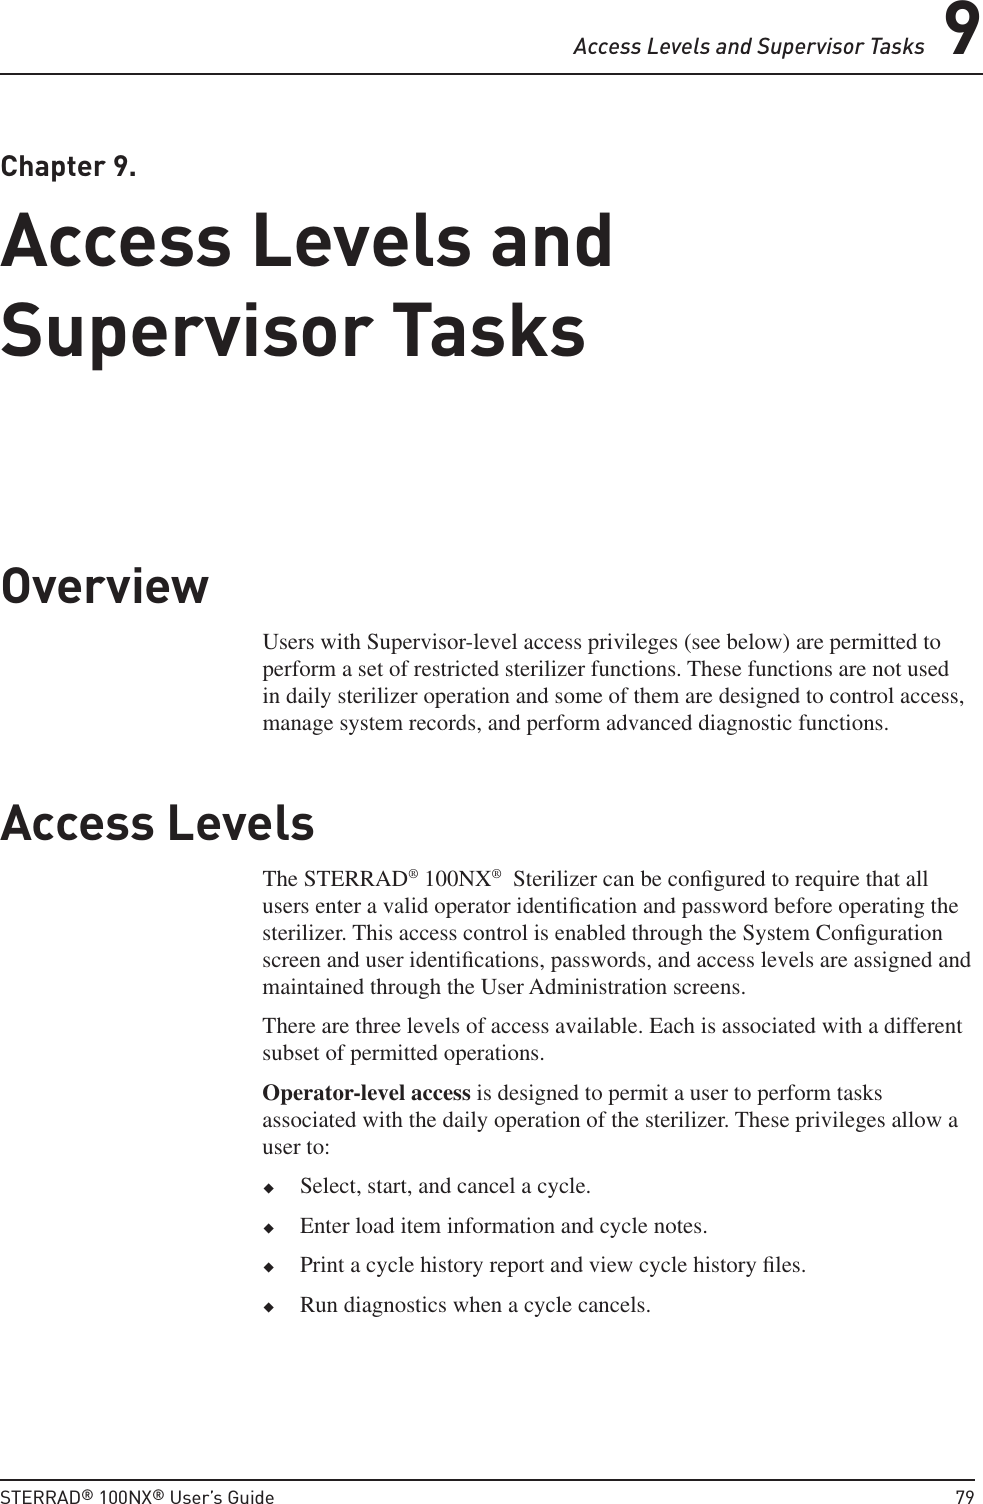 Access Levels and Supervisor Tasks 9STERRAD® 100NX® User’s Guide  79 Chapter  9.  Access Levels and Supervisor TasksAccess Levels and Supervisor TasksOverviewUsers with Supervisor-level access privileges (see below) are permitted to perform a set of restricted sterilizer functions. These functions are not used in daily sterilizer operation and some of them are designed to control access, manage system records, and perform advanced diagnostic functions.Access LevelsThe STERRAD® 100NX®  Sterilizer can be conﬁ gured to require that all users enter a valid operator identiﬁ cation and password before operating the sterilizer. This access control is enabled through the System Conﬁ guration screen and user identiﬁ cations, passwords, and access levels are assigned and maintained through the User Administration screens.There are three levels of access available. Each is associated with a different subset of permitted operations.Operator-level access is designed to permit a user to perform tasks associated with the daily operation of the sterilizer. These privileges allow a user to: Select, start, and cancel a cycle. Enter load item information and cycle notes. Print a cycle history report and view cycle history ﬁ les. Run diagnostics when a cycle cancels.